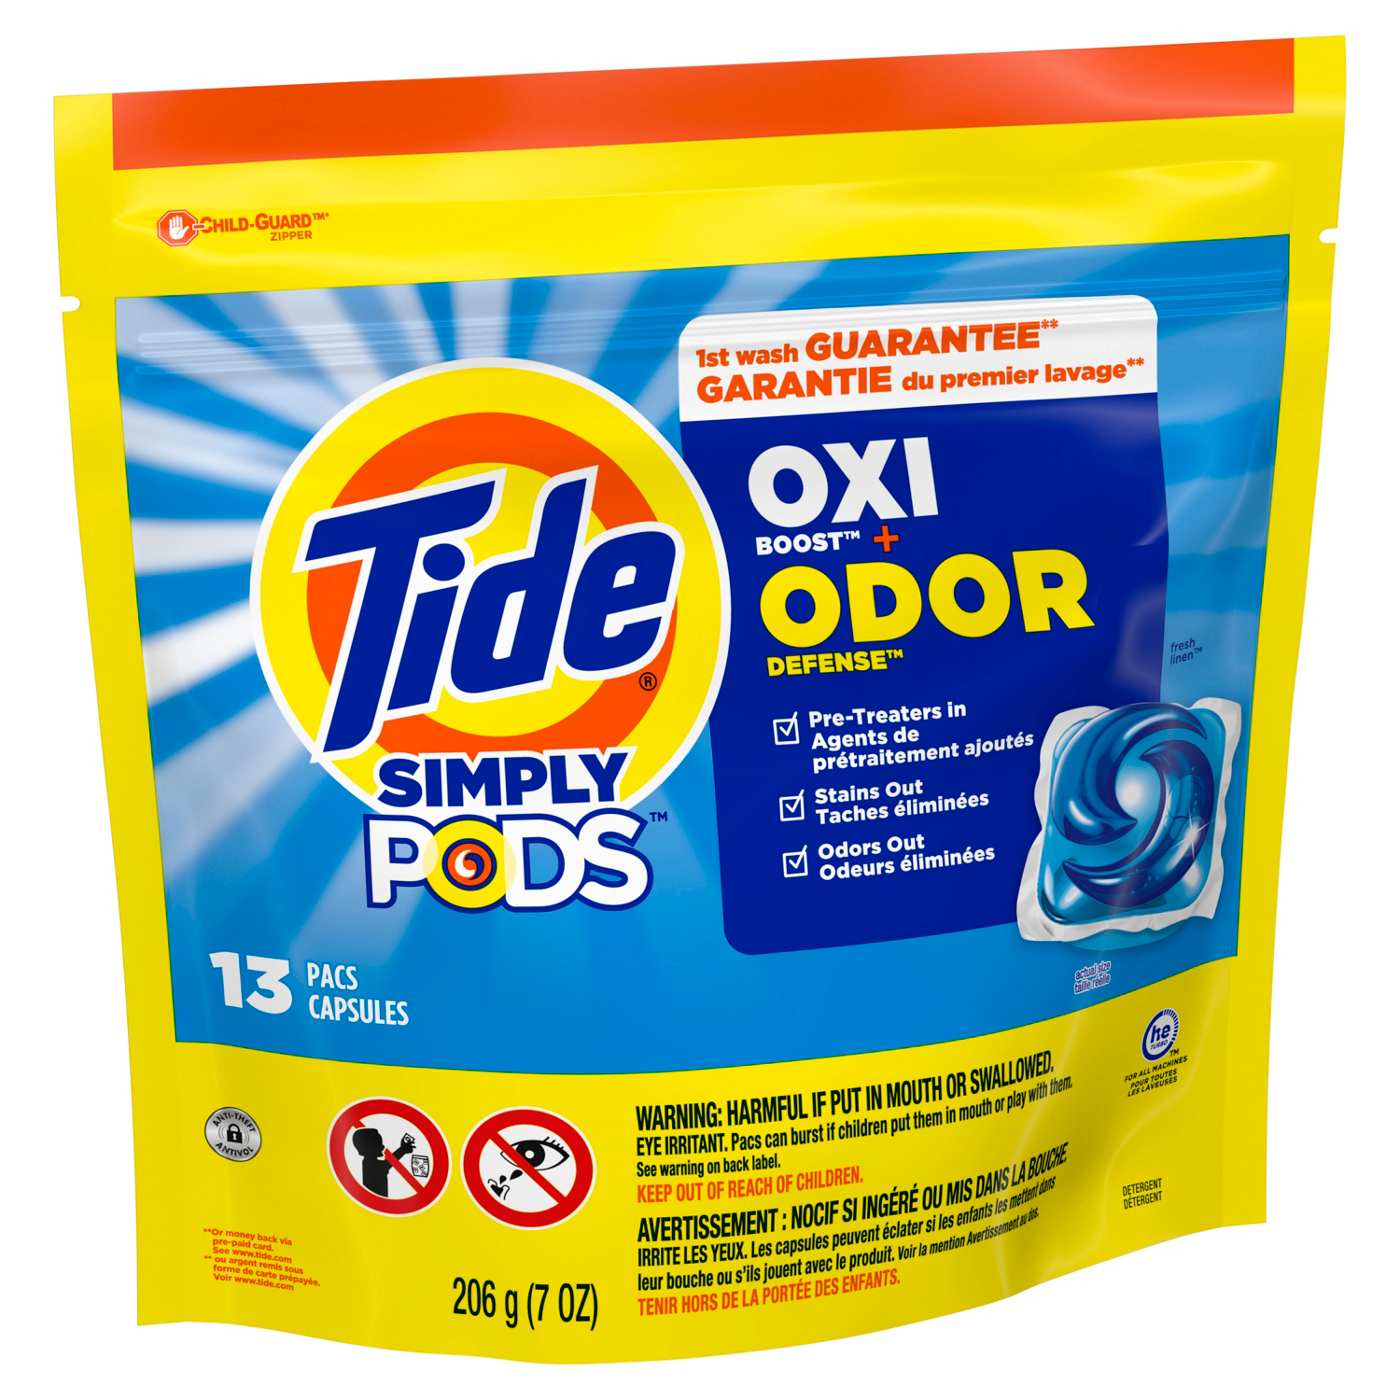 Tide Simply PODS Oxi Boost & Odor Defense Laundry Detergent Pacs; image 7 of 9